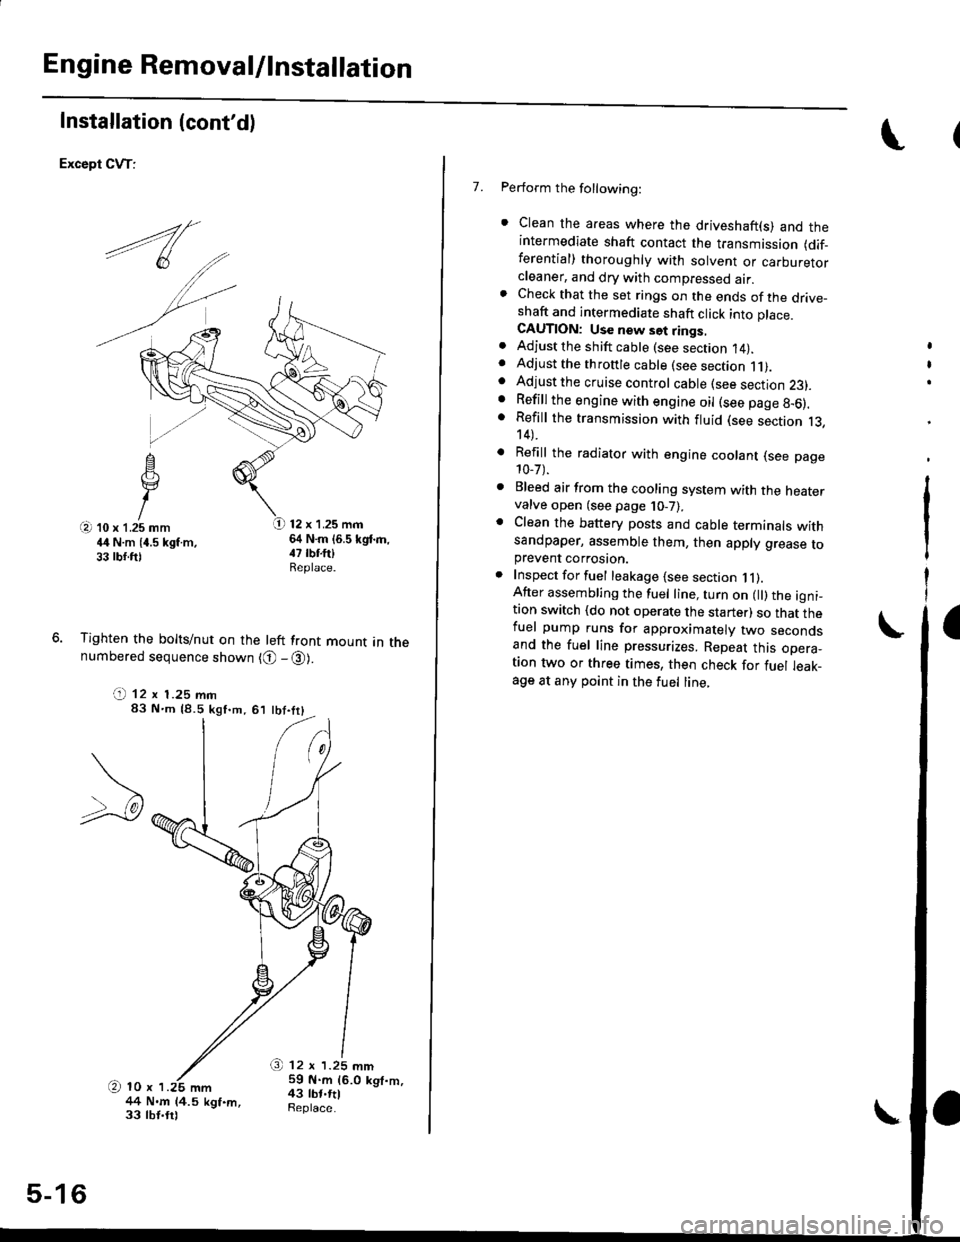 HONDA CIVIC 1998 6.G Workshop Manual Engine Removal/lnstallation
Installation (contd)
Except CVT:
12 x 1.25 mm64 N.m (6.5 kgd.m,
Tighten the bolts/nut on the left front mount in thenumbered sequence shown {O - @).
(t 12 x 1.25 mm83 Nm 